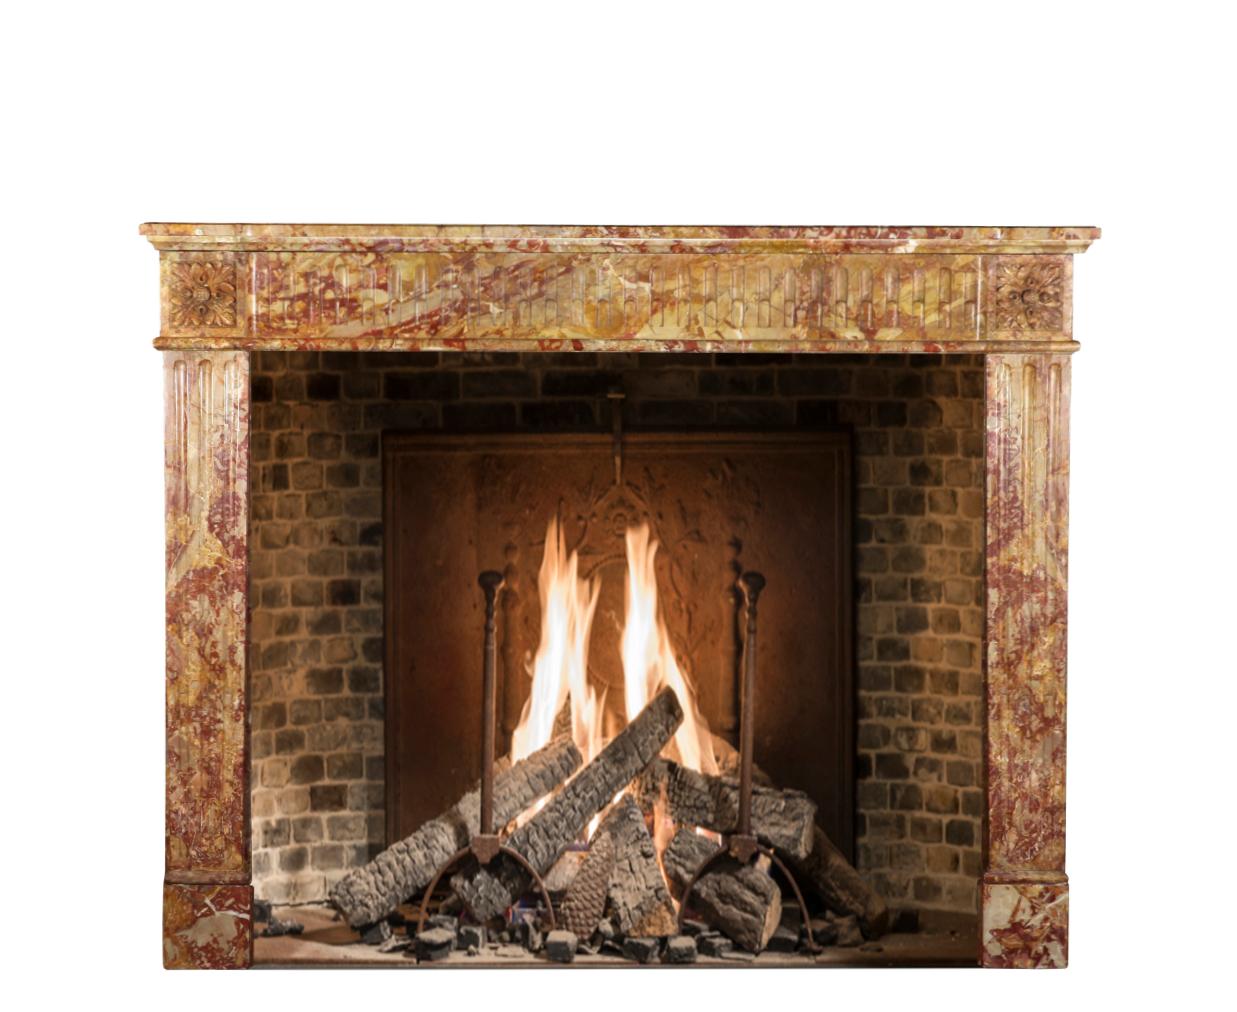 This exclusive and rich colourful marble fireplace surround is a prefect match for a contemporary eclectic chic interior design concept. The Louis XVI style is classic and high in quality. The front piece had a restoration. 19th Century period for